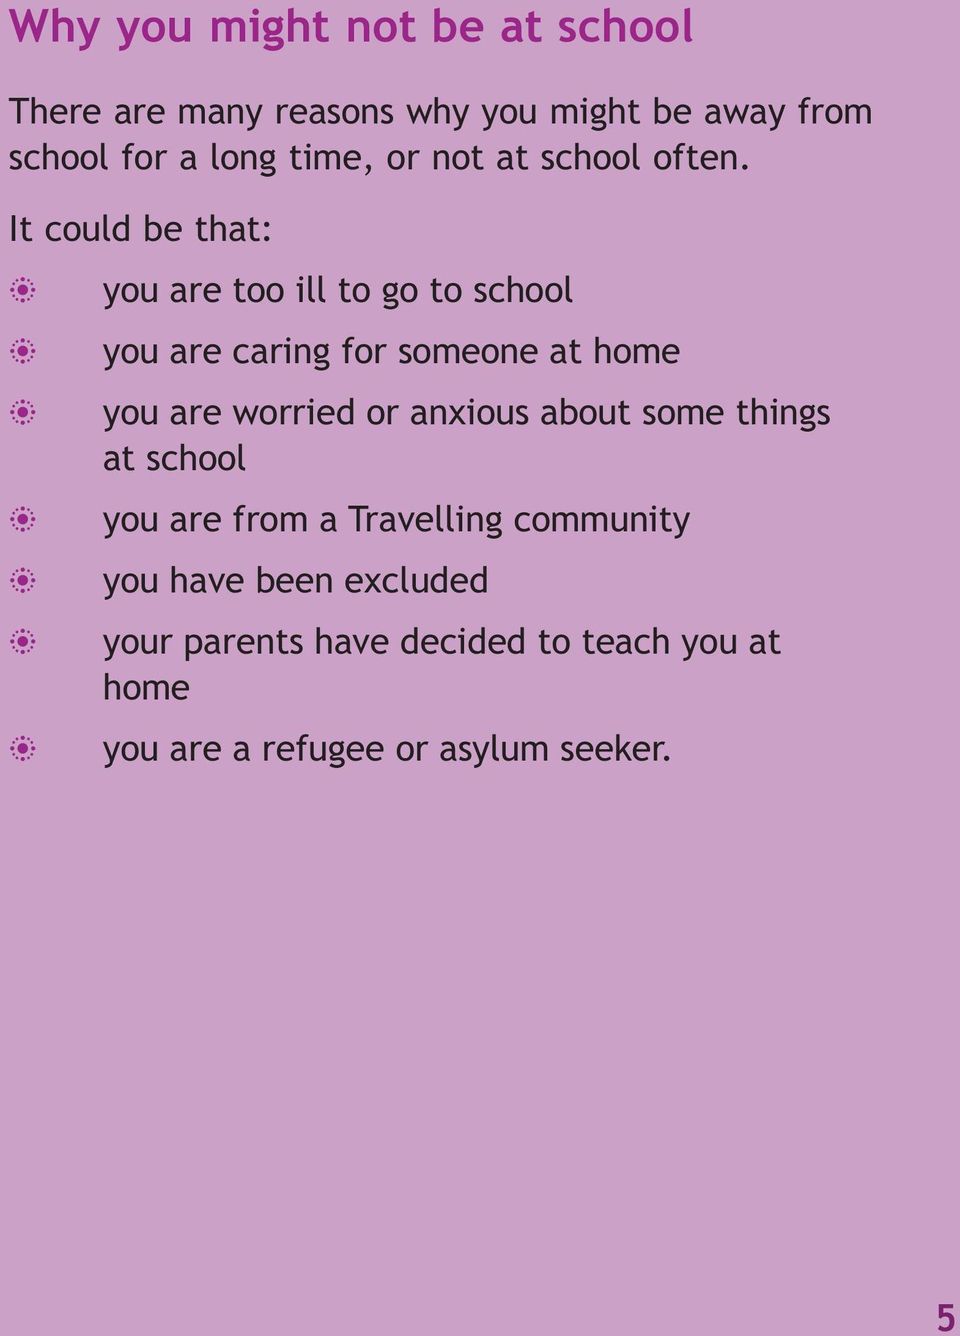 It could e that: you are too ill to go to school you are caring for someone at home you are worried